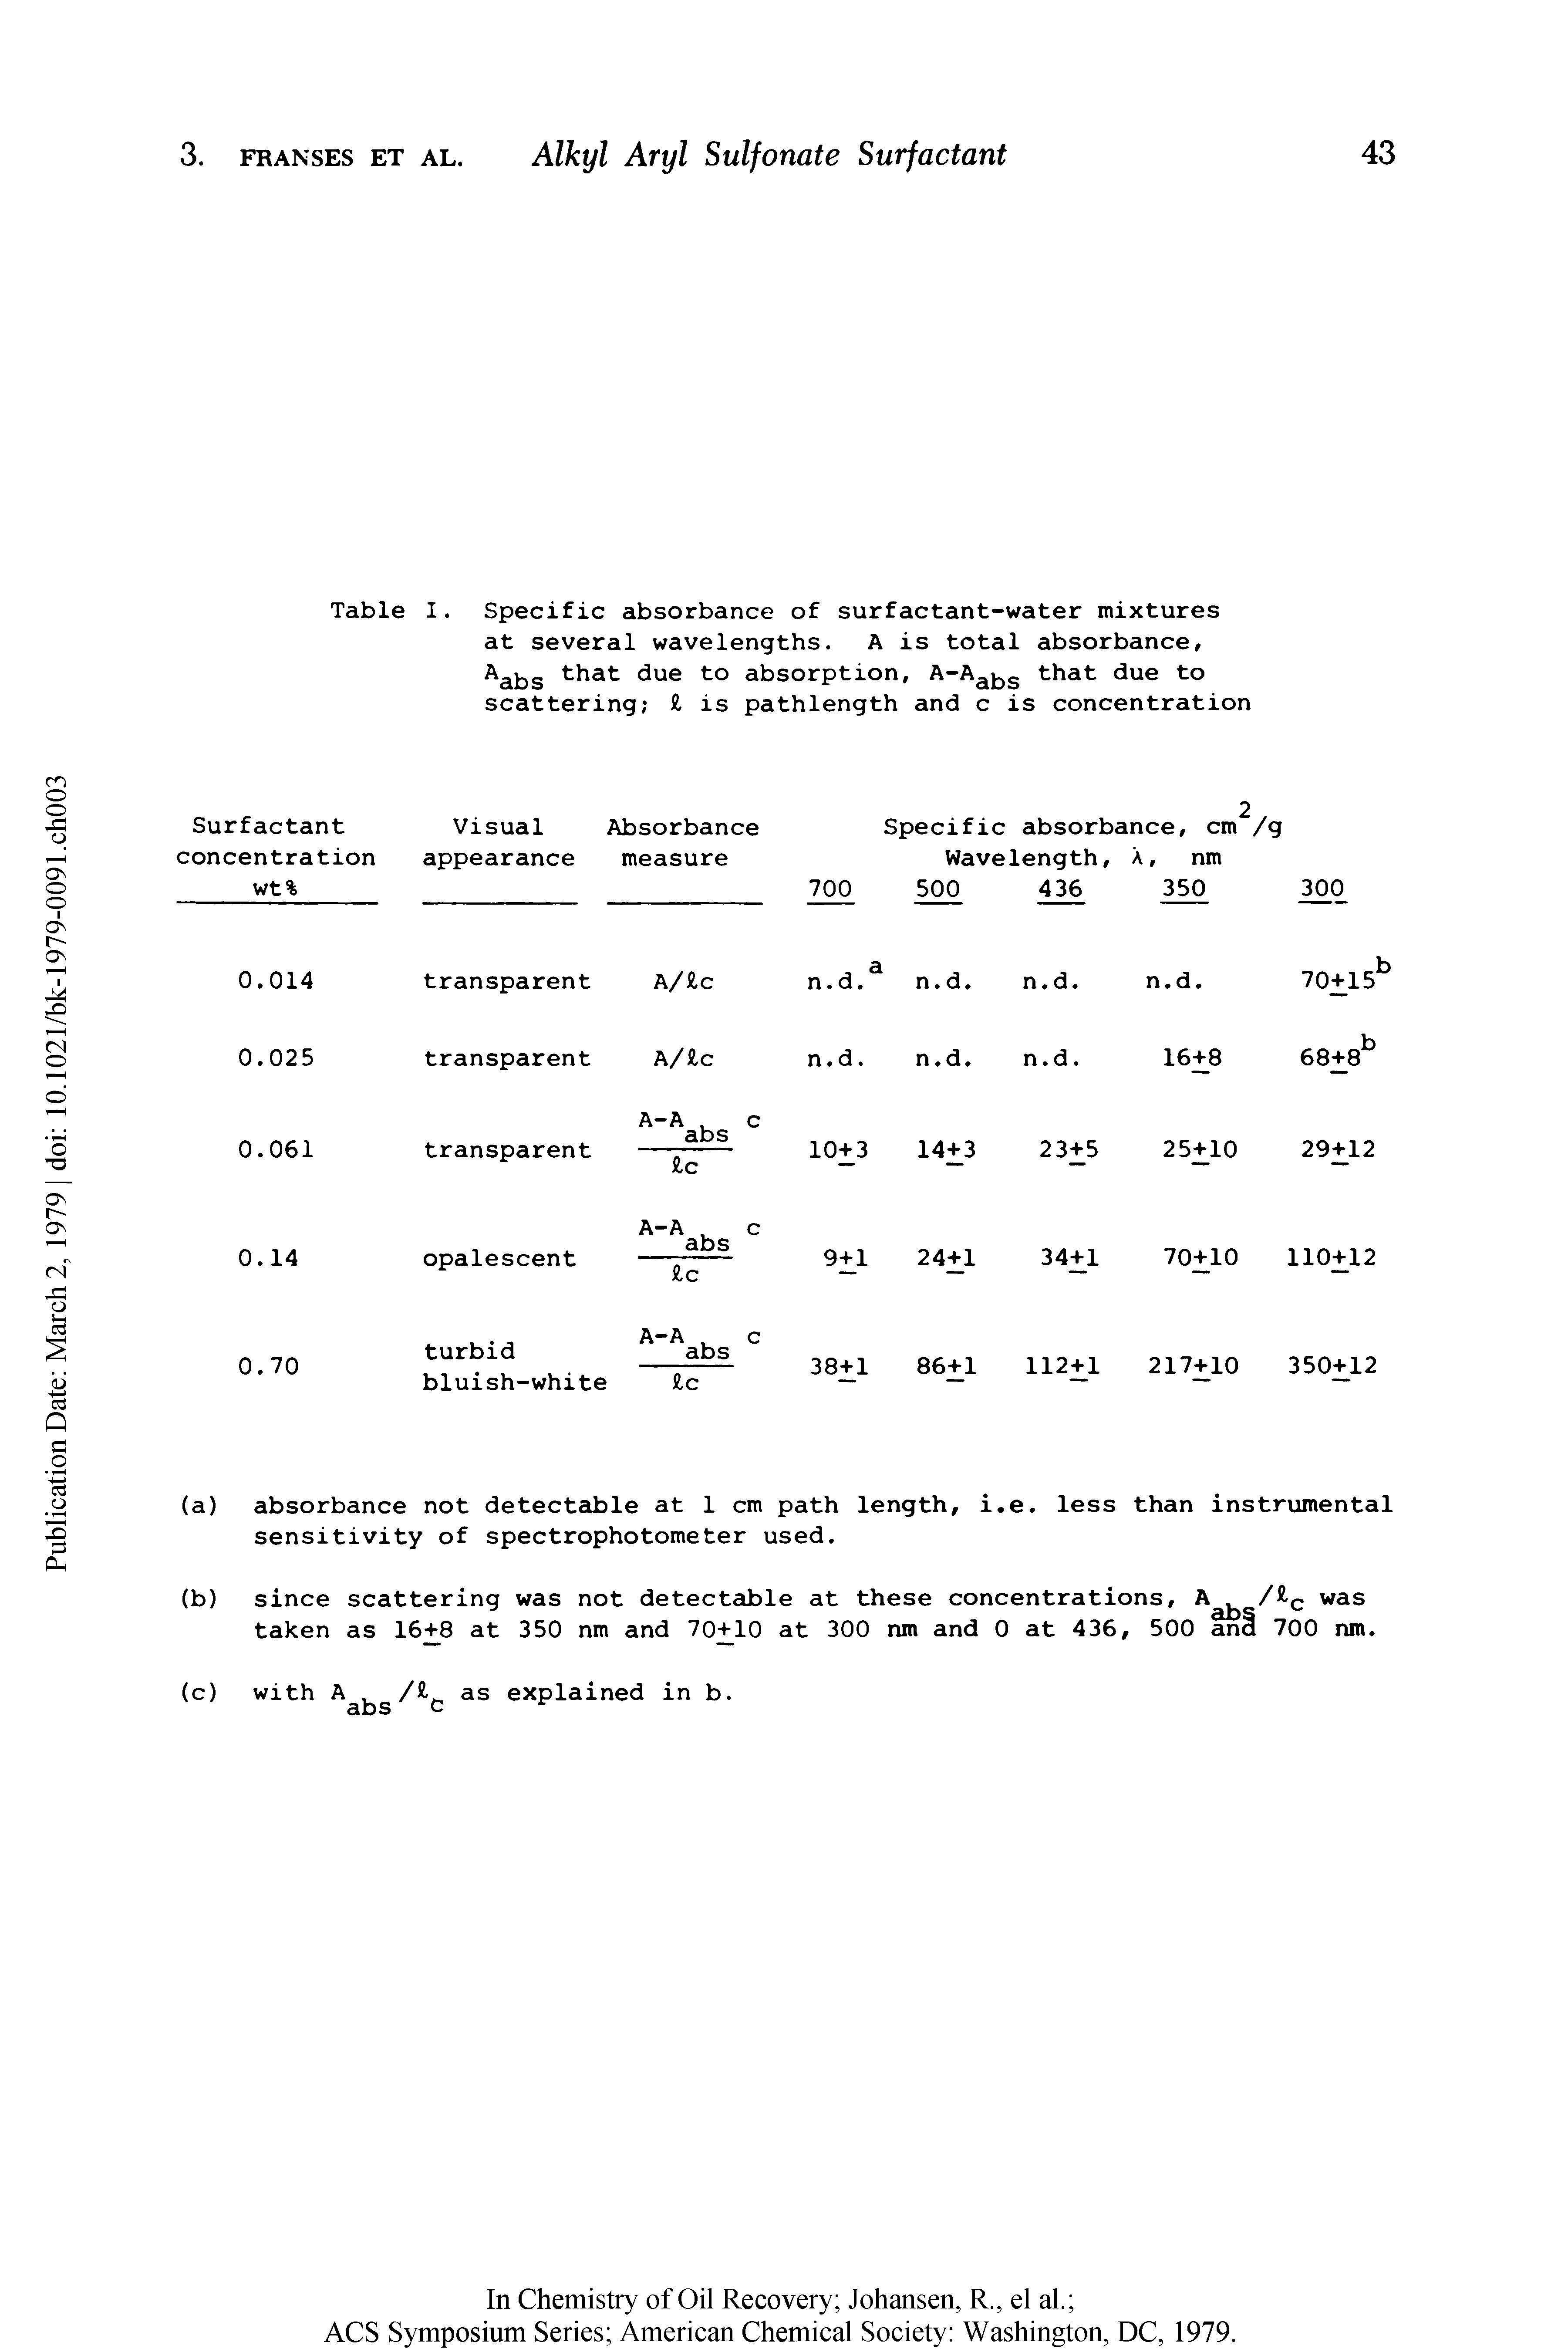 Table I. Specific absorbance of surfactant-water mixtures at several wavelengths. A is total absorbance, Aabs fchat due to absorption, A-Aa S that due to scattering l is pathlength and c is concentration...